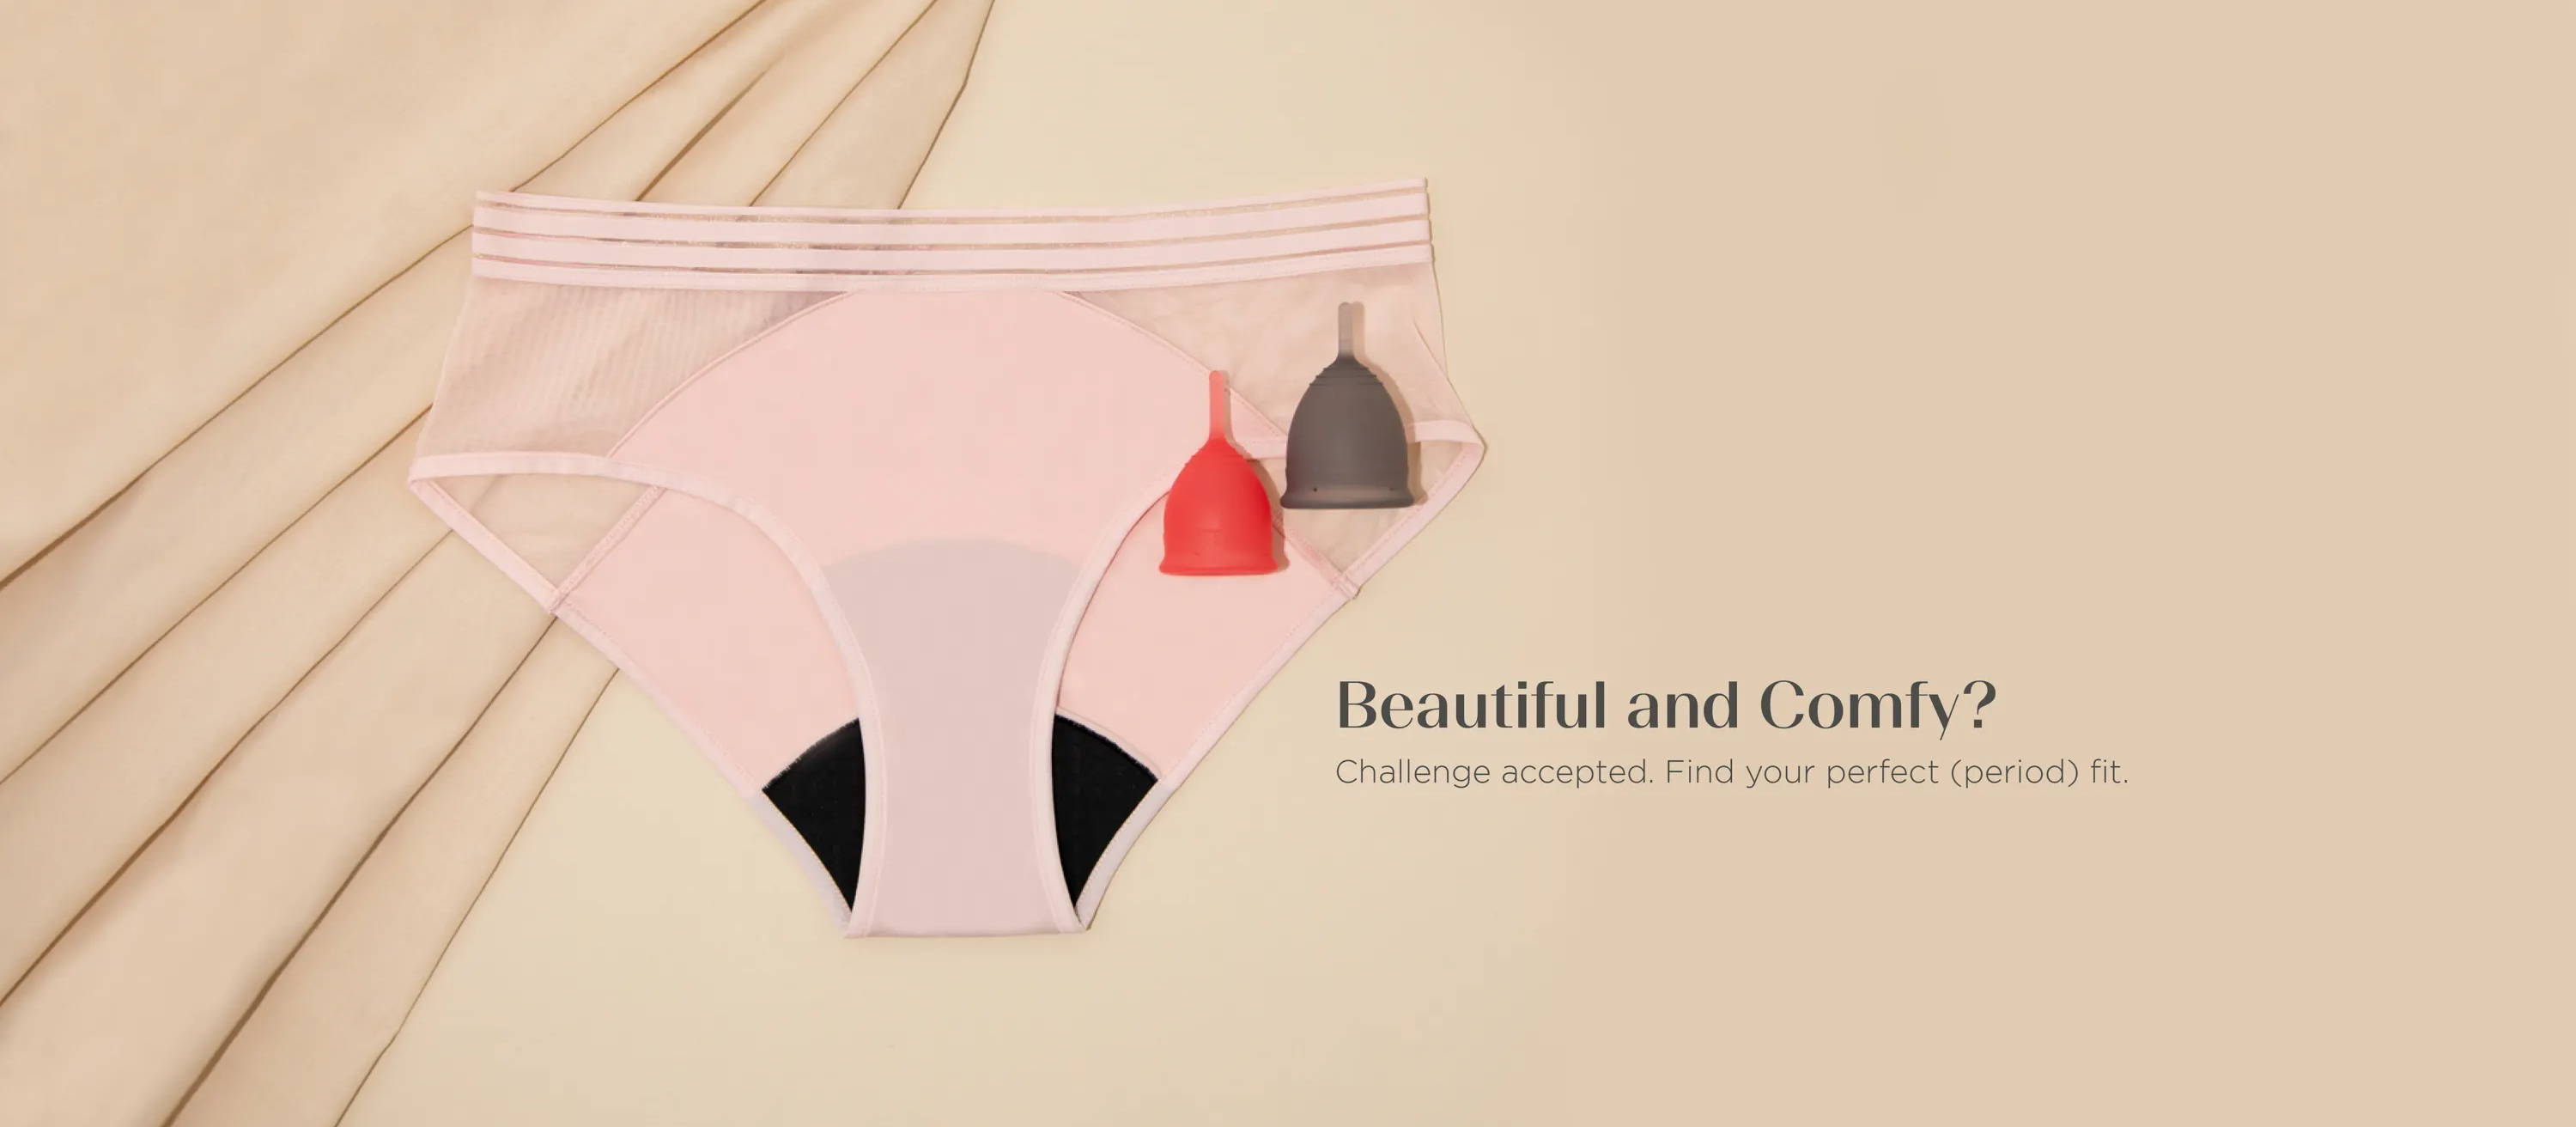 Beautiful and Comfy? Find your perfect fit for Saalt period underwear. 